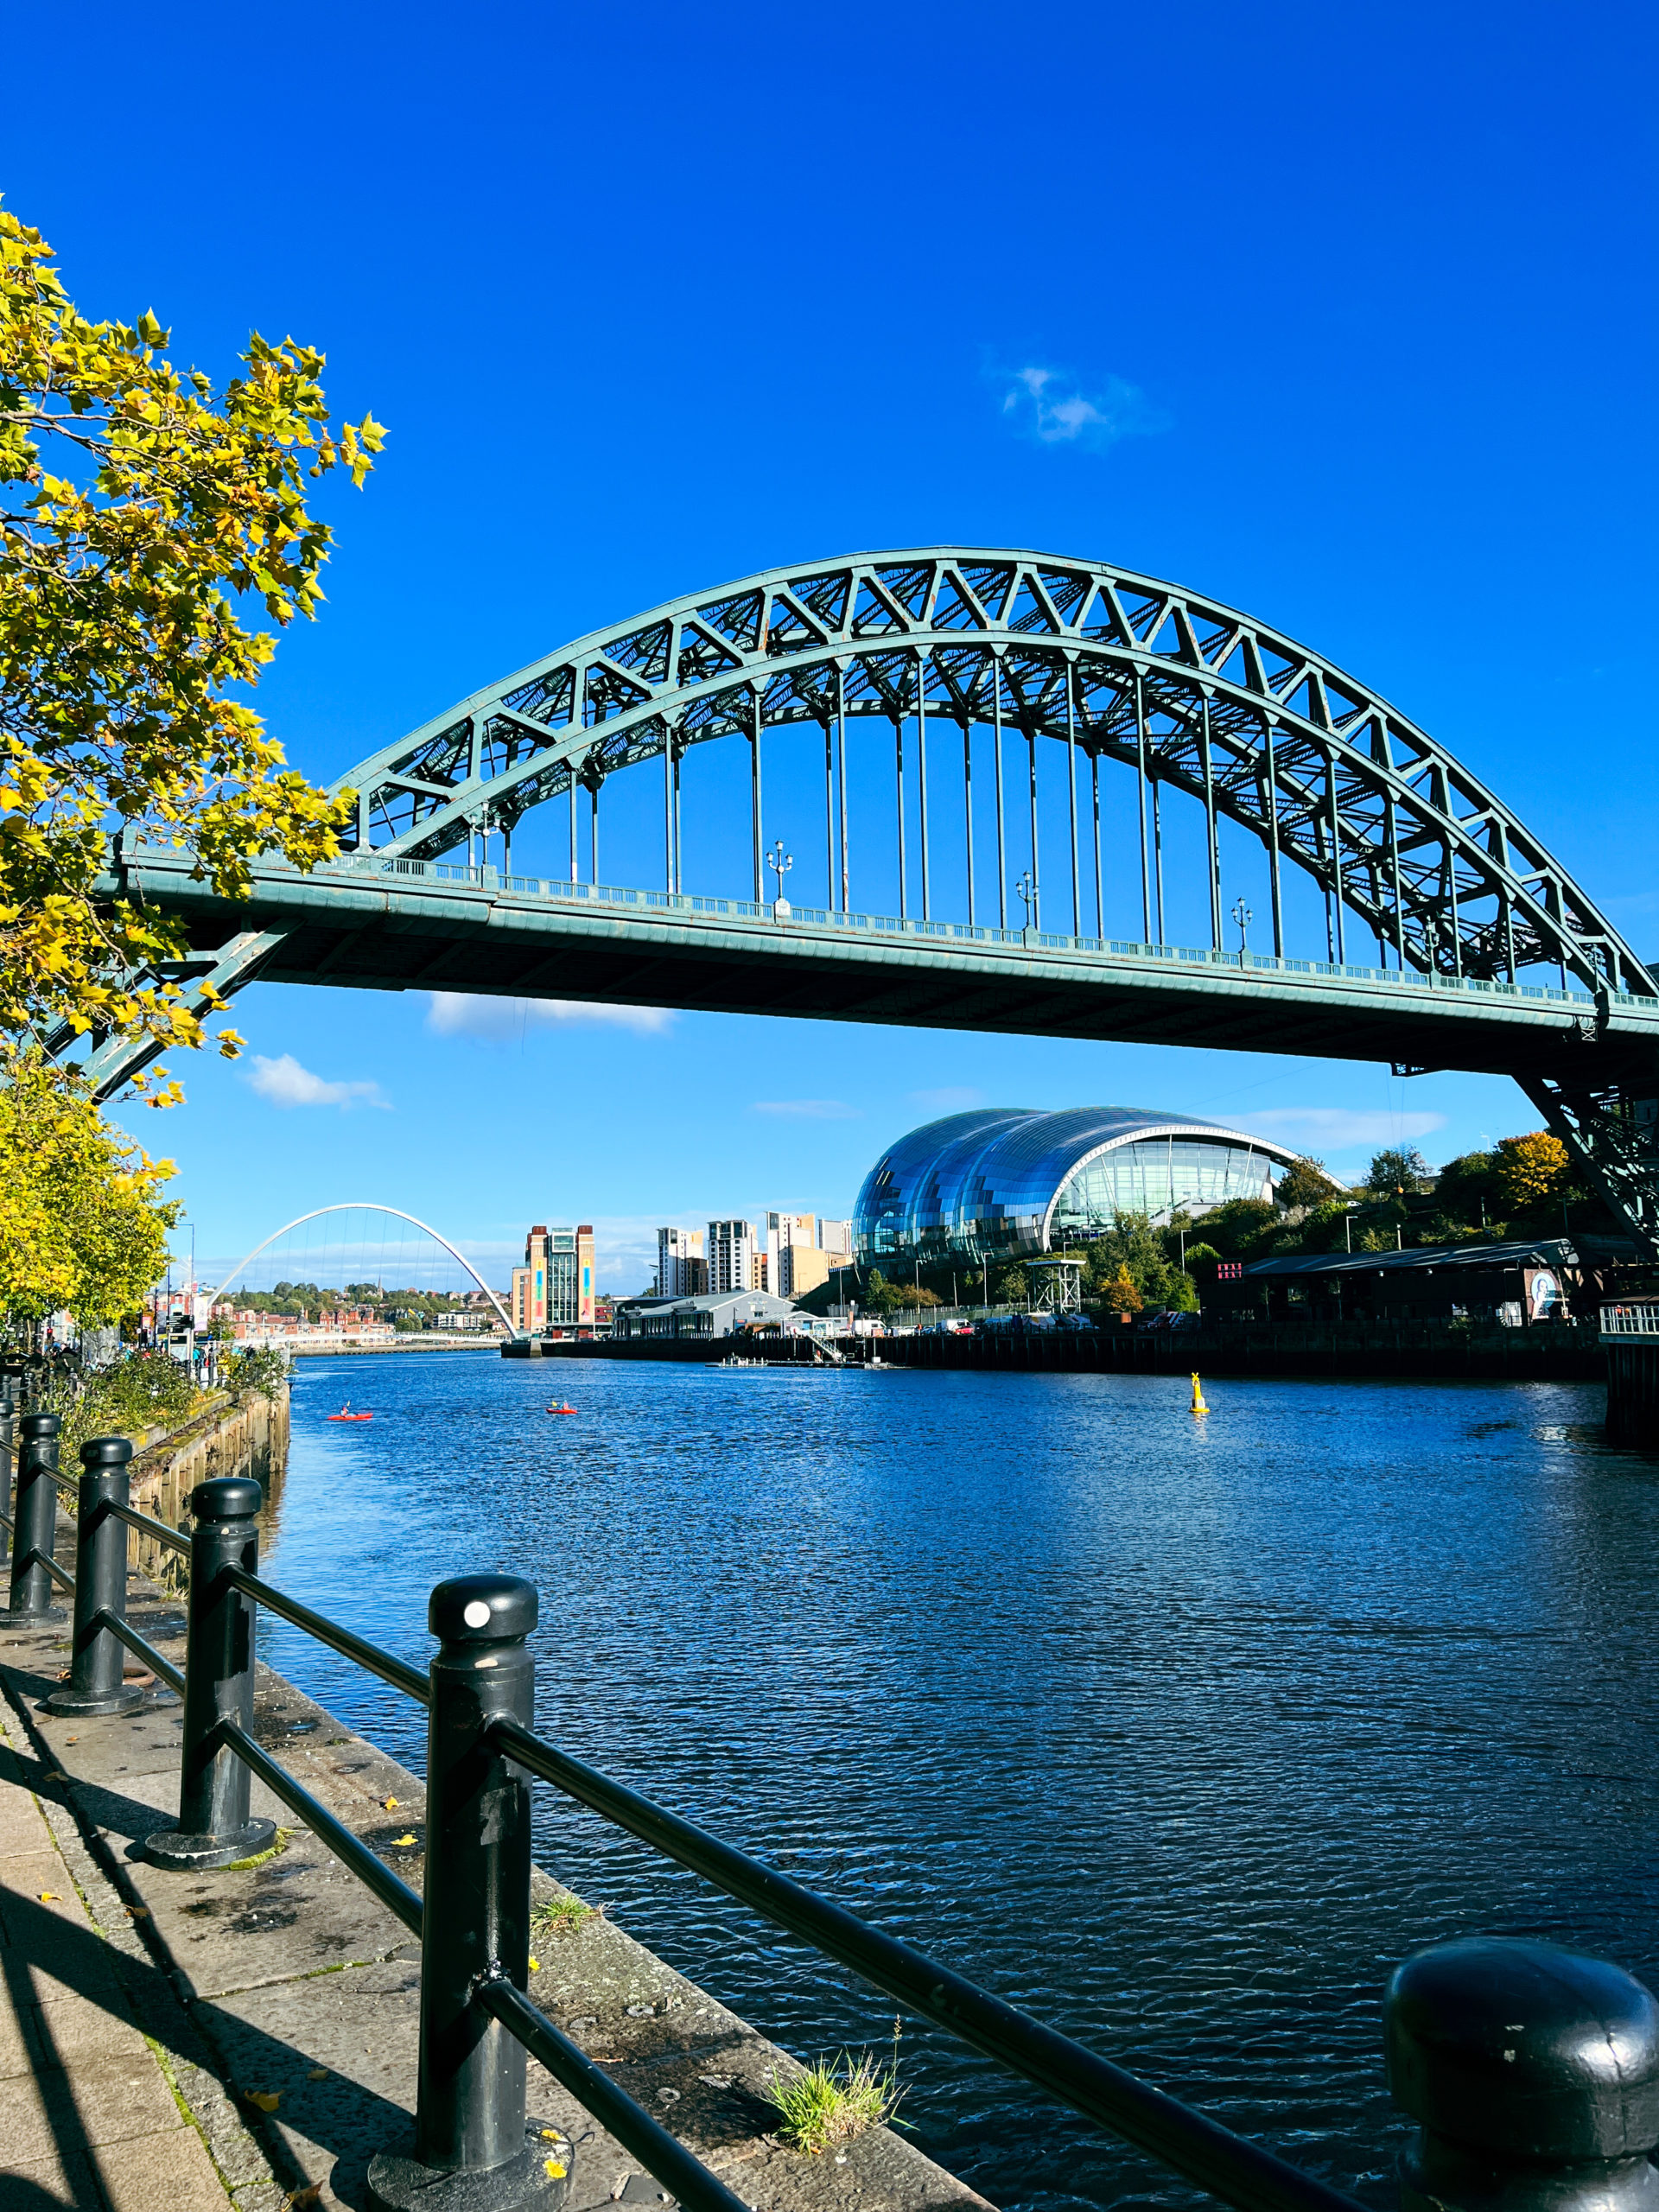 5 Unique Places to Visit in North East England